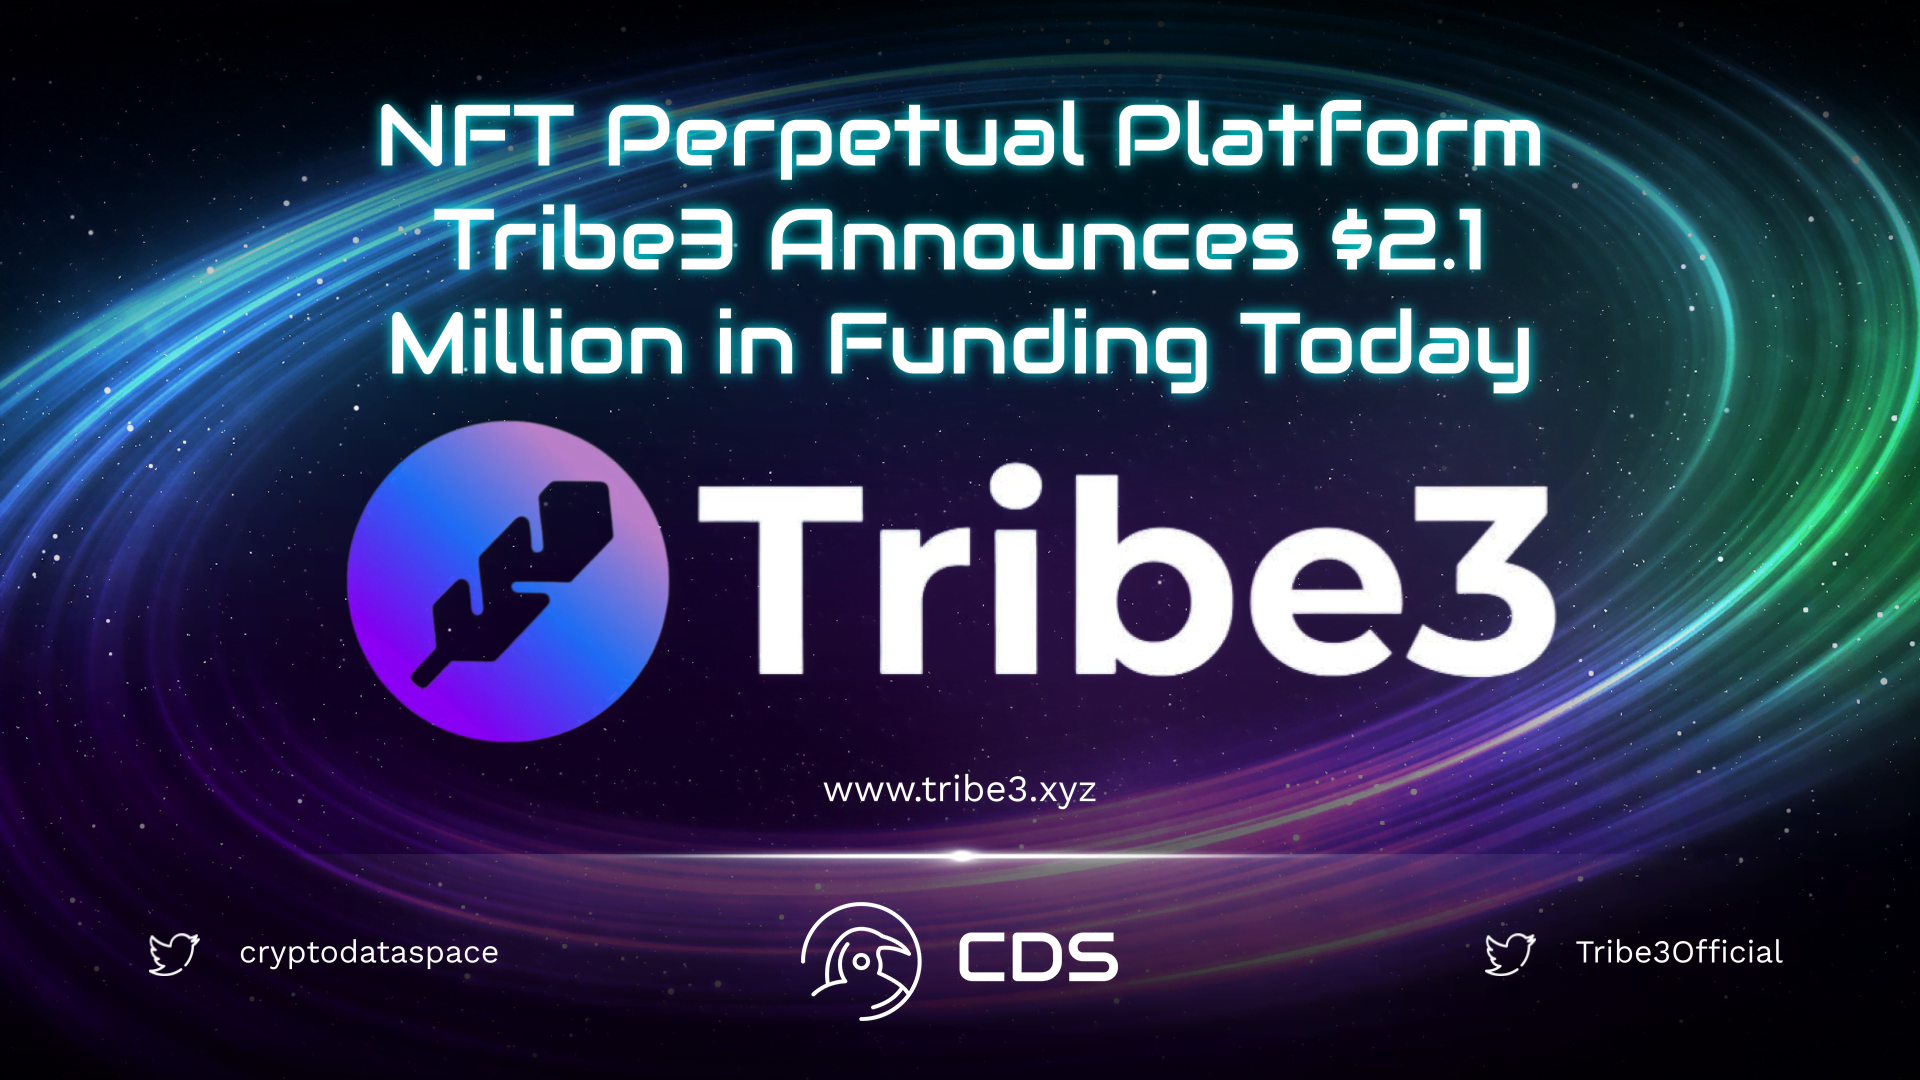 NFT Perpetual Platform Tribe3 Announces $2.1 Million in Funding Today